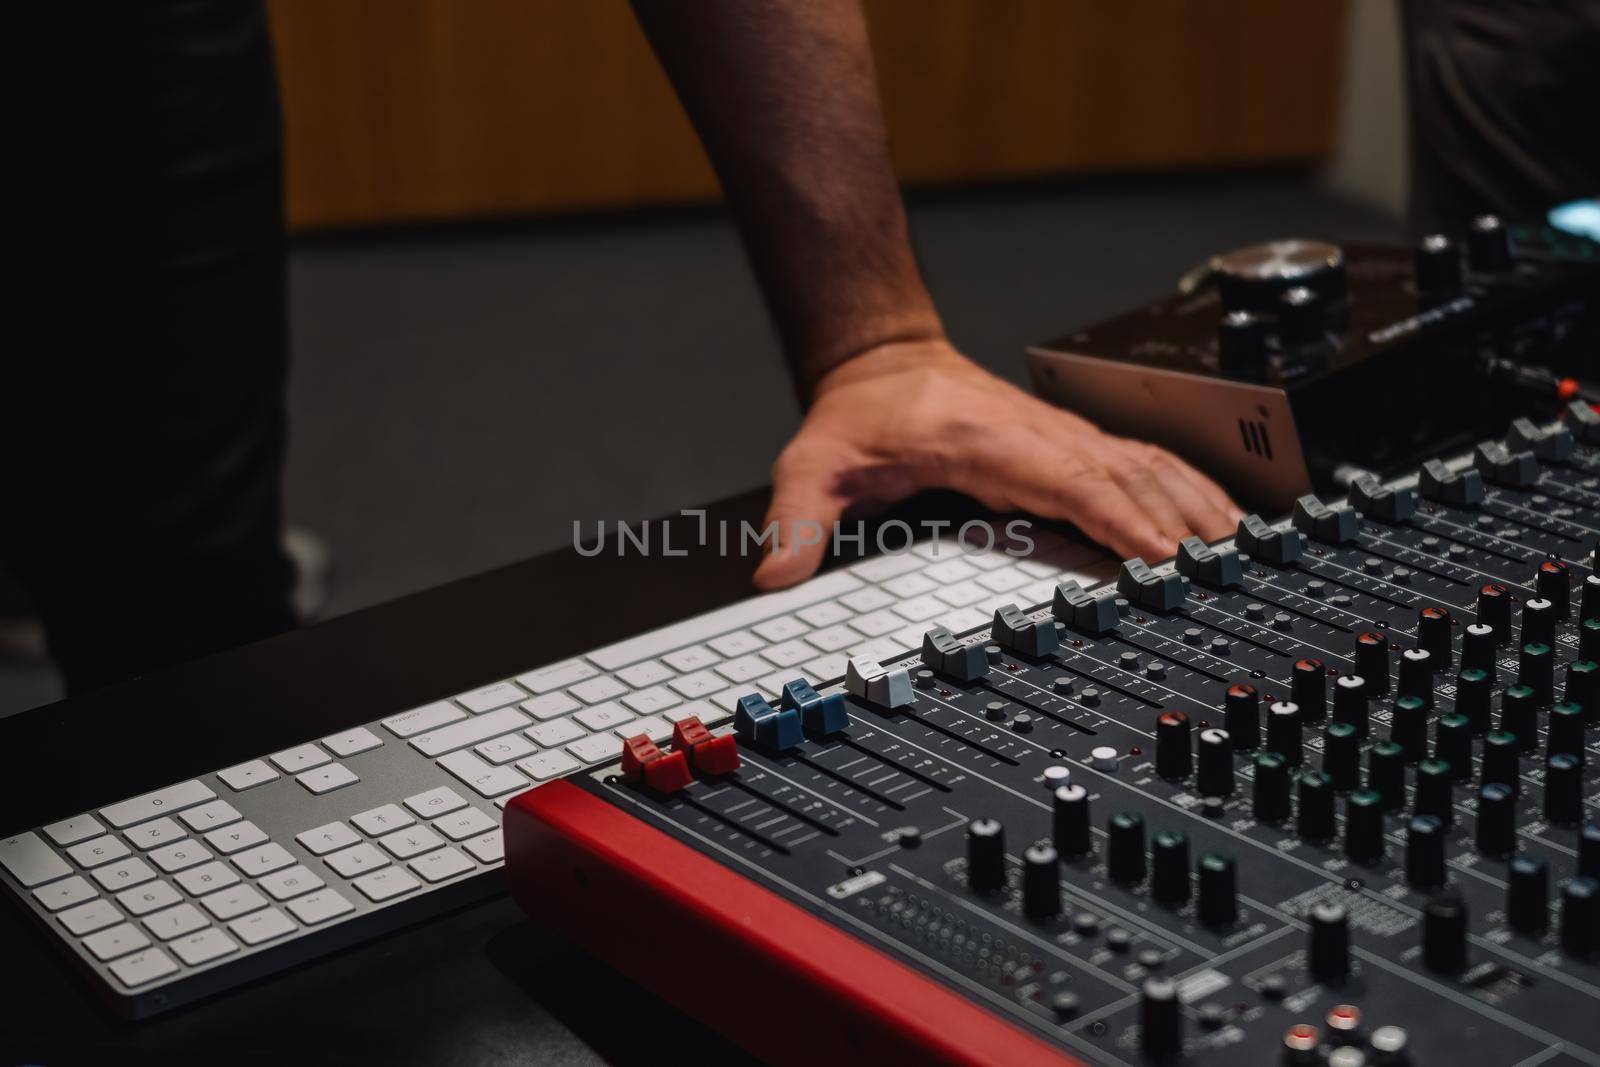 Producer hands at the keyboard in a studio. Musician arranging and mixing music in home studio. Music production concept.